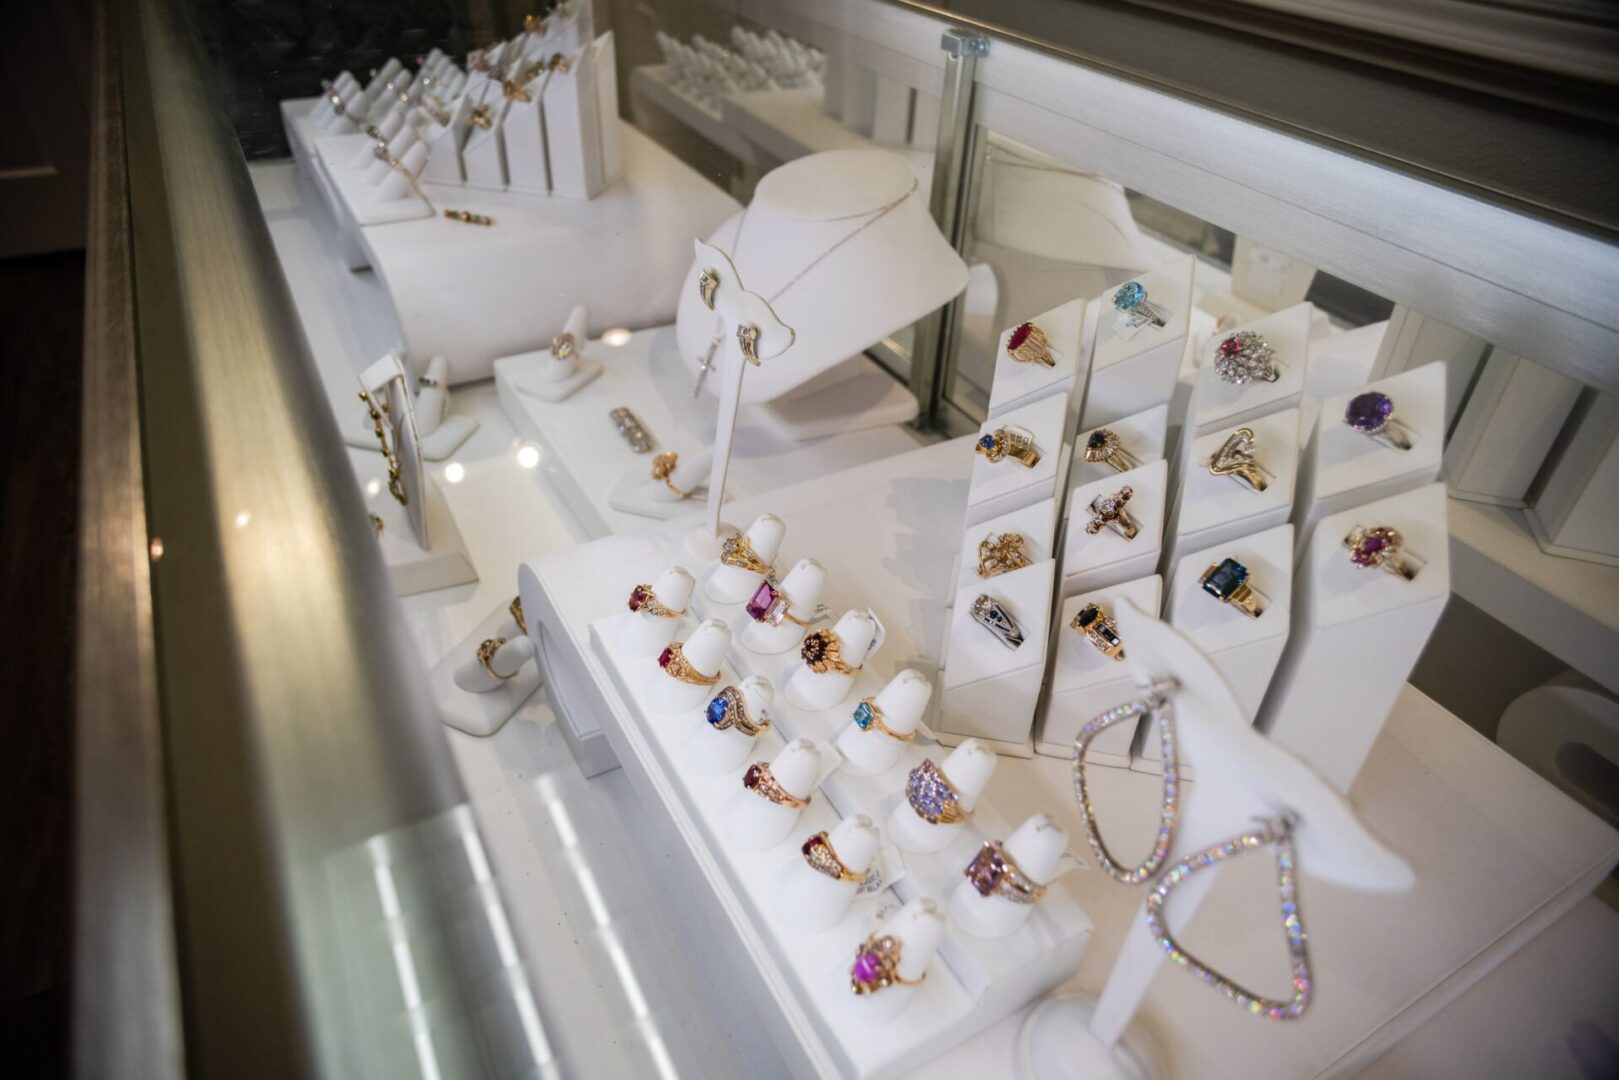 A display case filled with lots of jewelry.